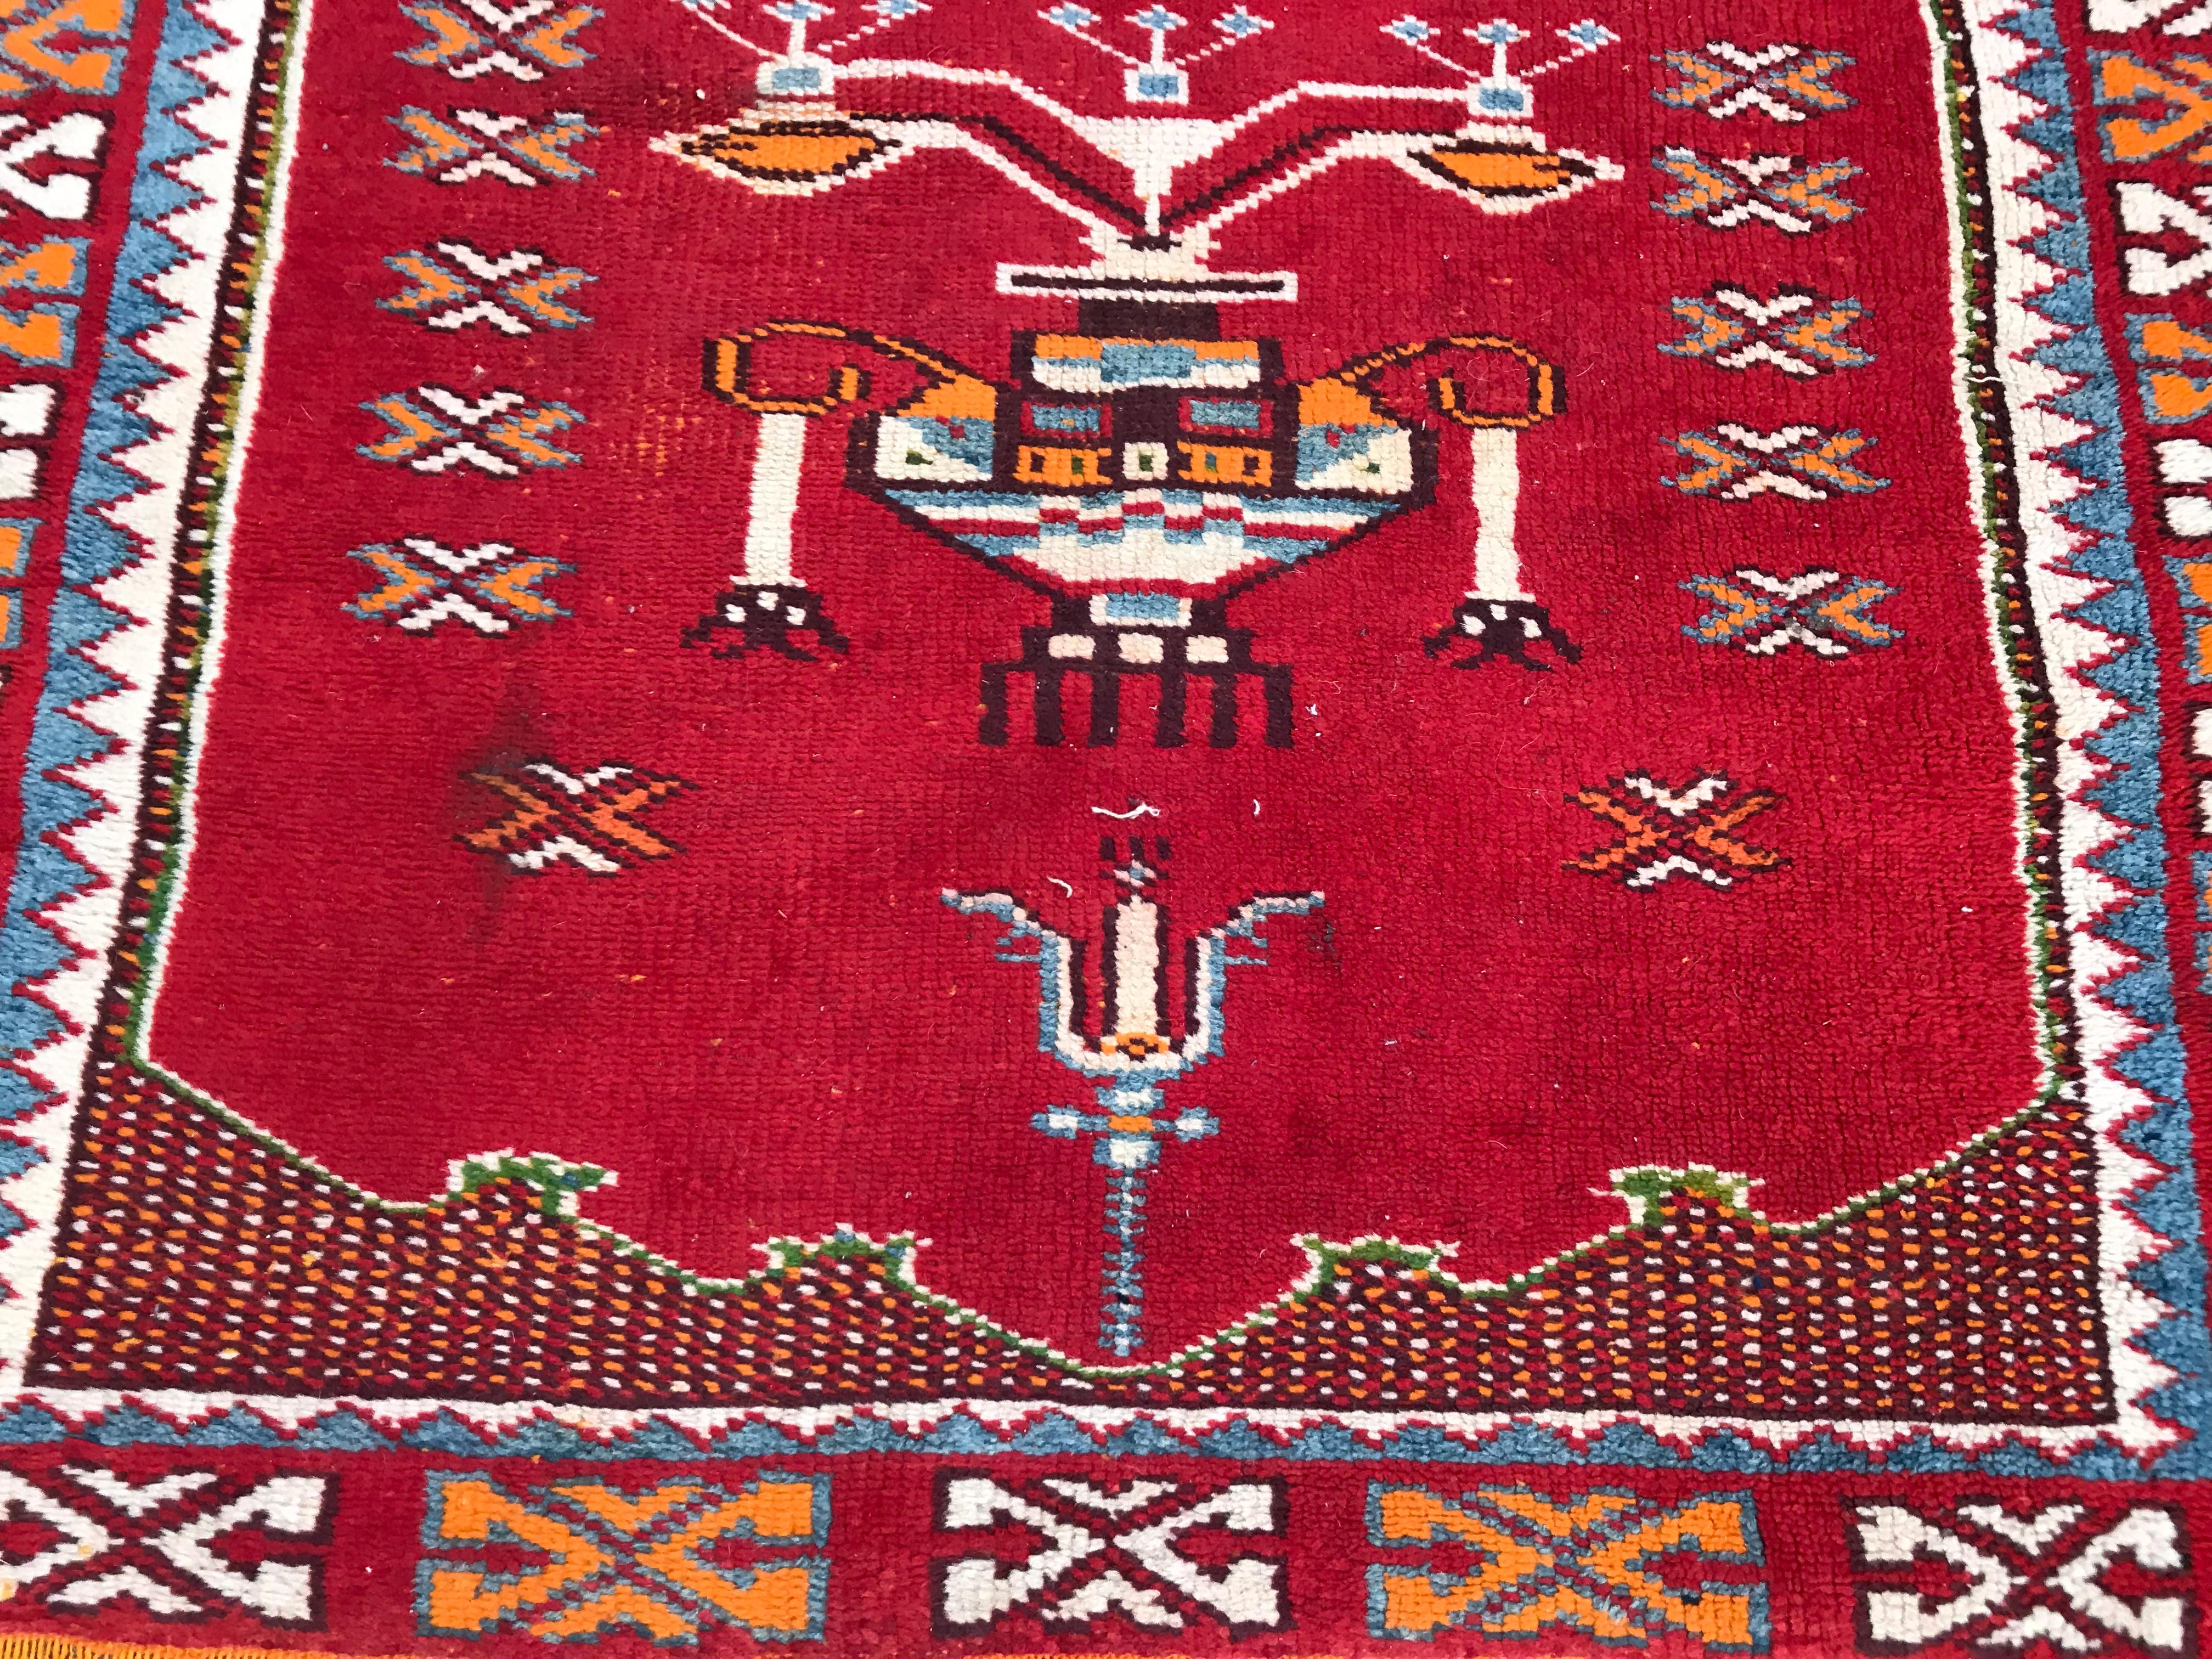 Beautiful 20th century Moroccan Berbere rug, with nice red field and tribal design, entirely hand knotted with wool velvet on wool foundation.

✨✨✨
